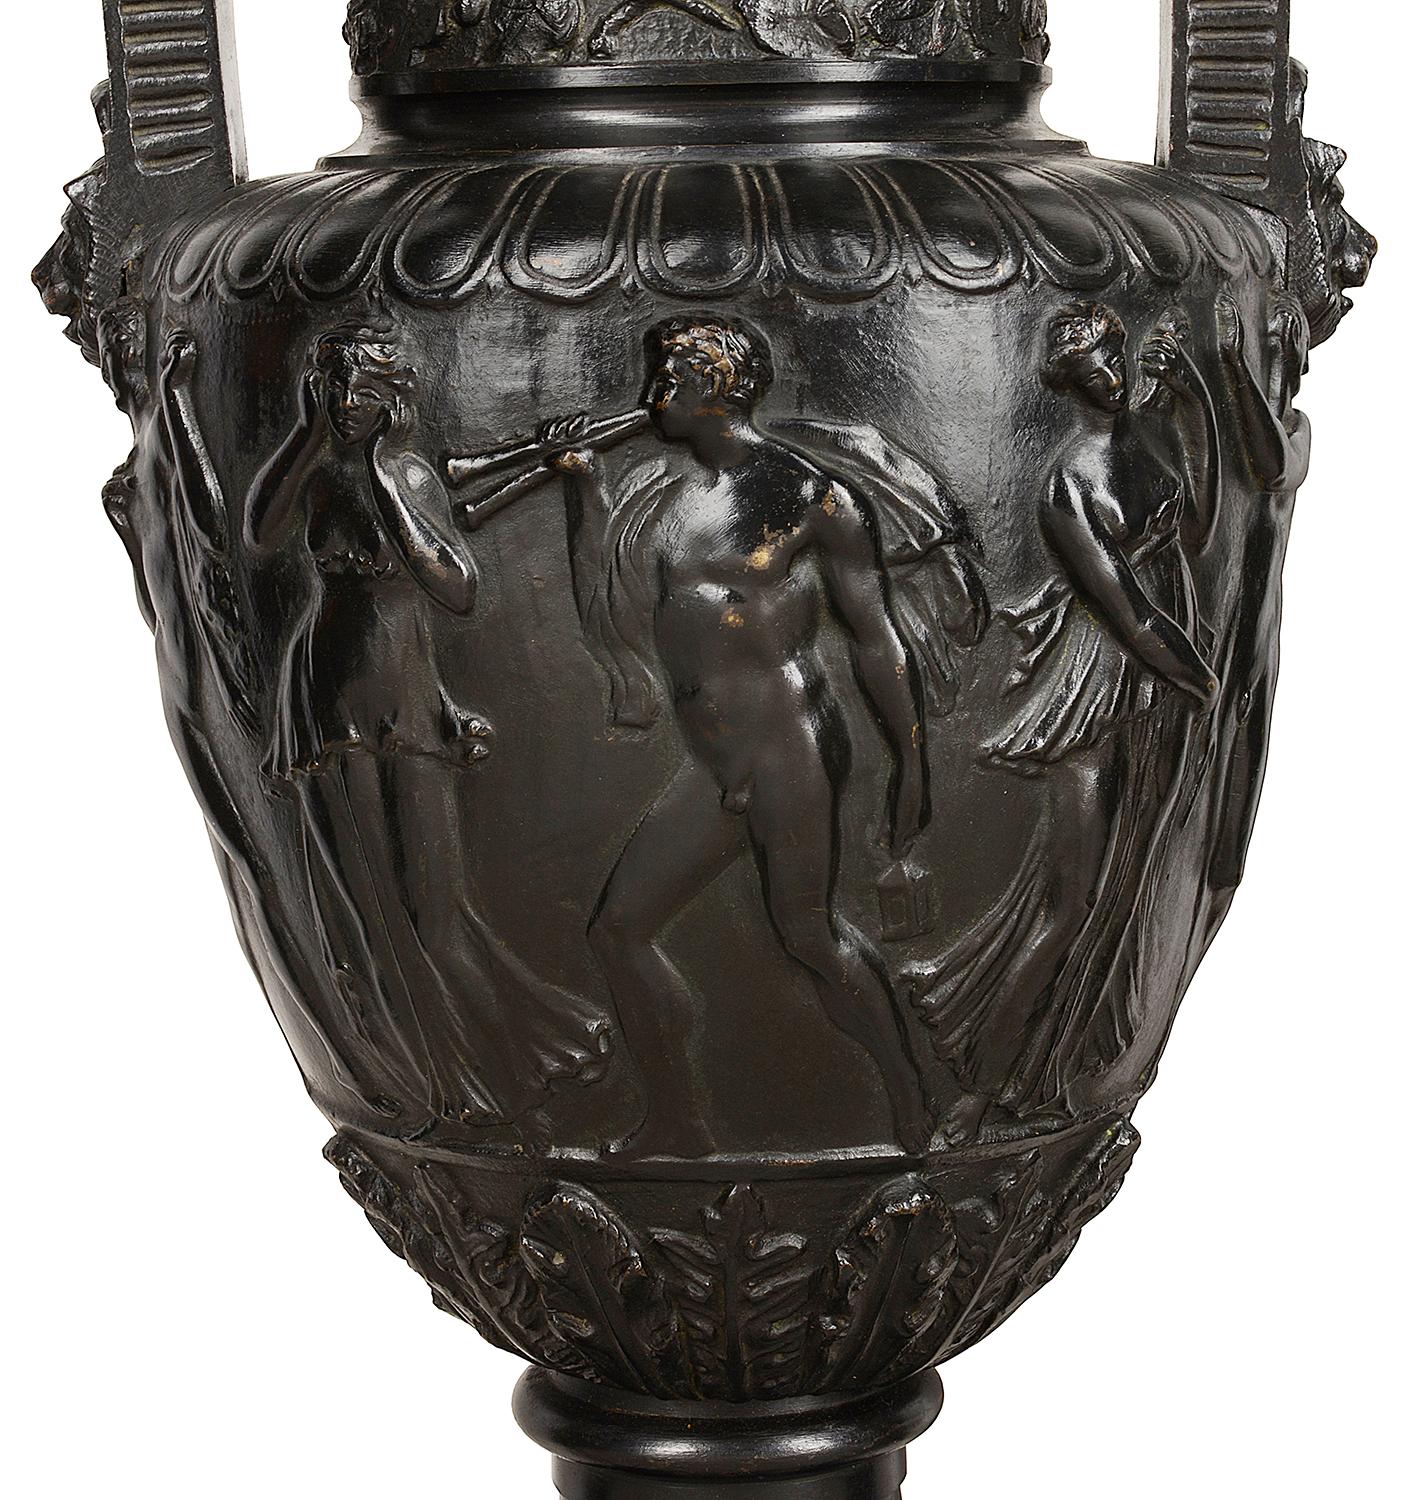 A good quality pair of 19th century French bronze neoclassical two handled lion mask urns, each depicting dancing nude figures around the center and raised on black marble bases with scrolling bronze feet. Measures: 45cm (18.5